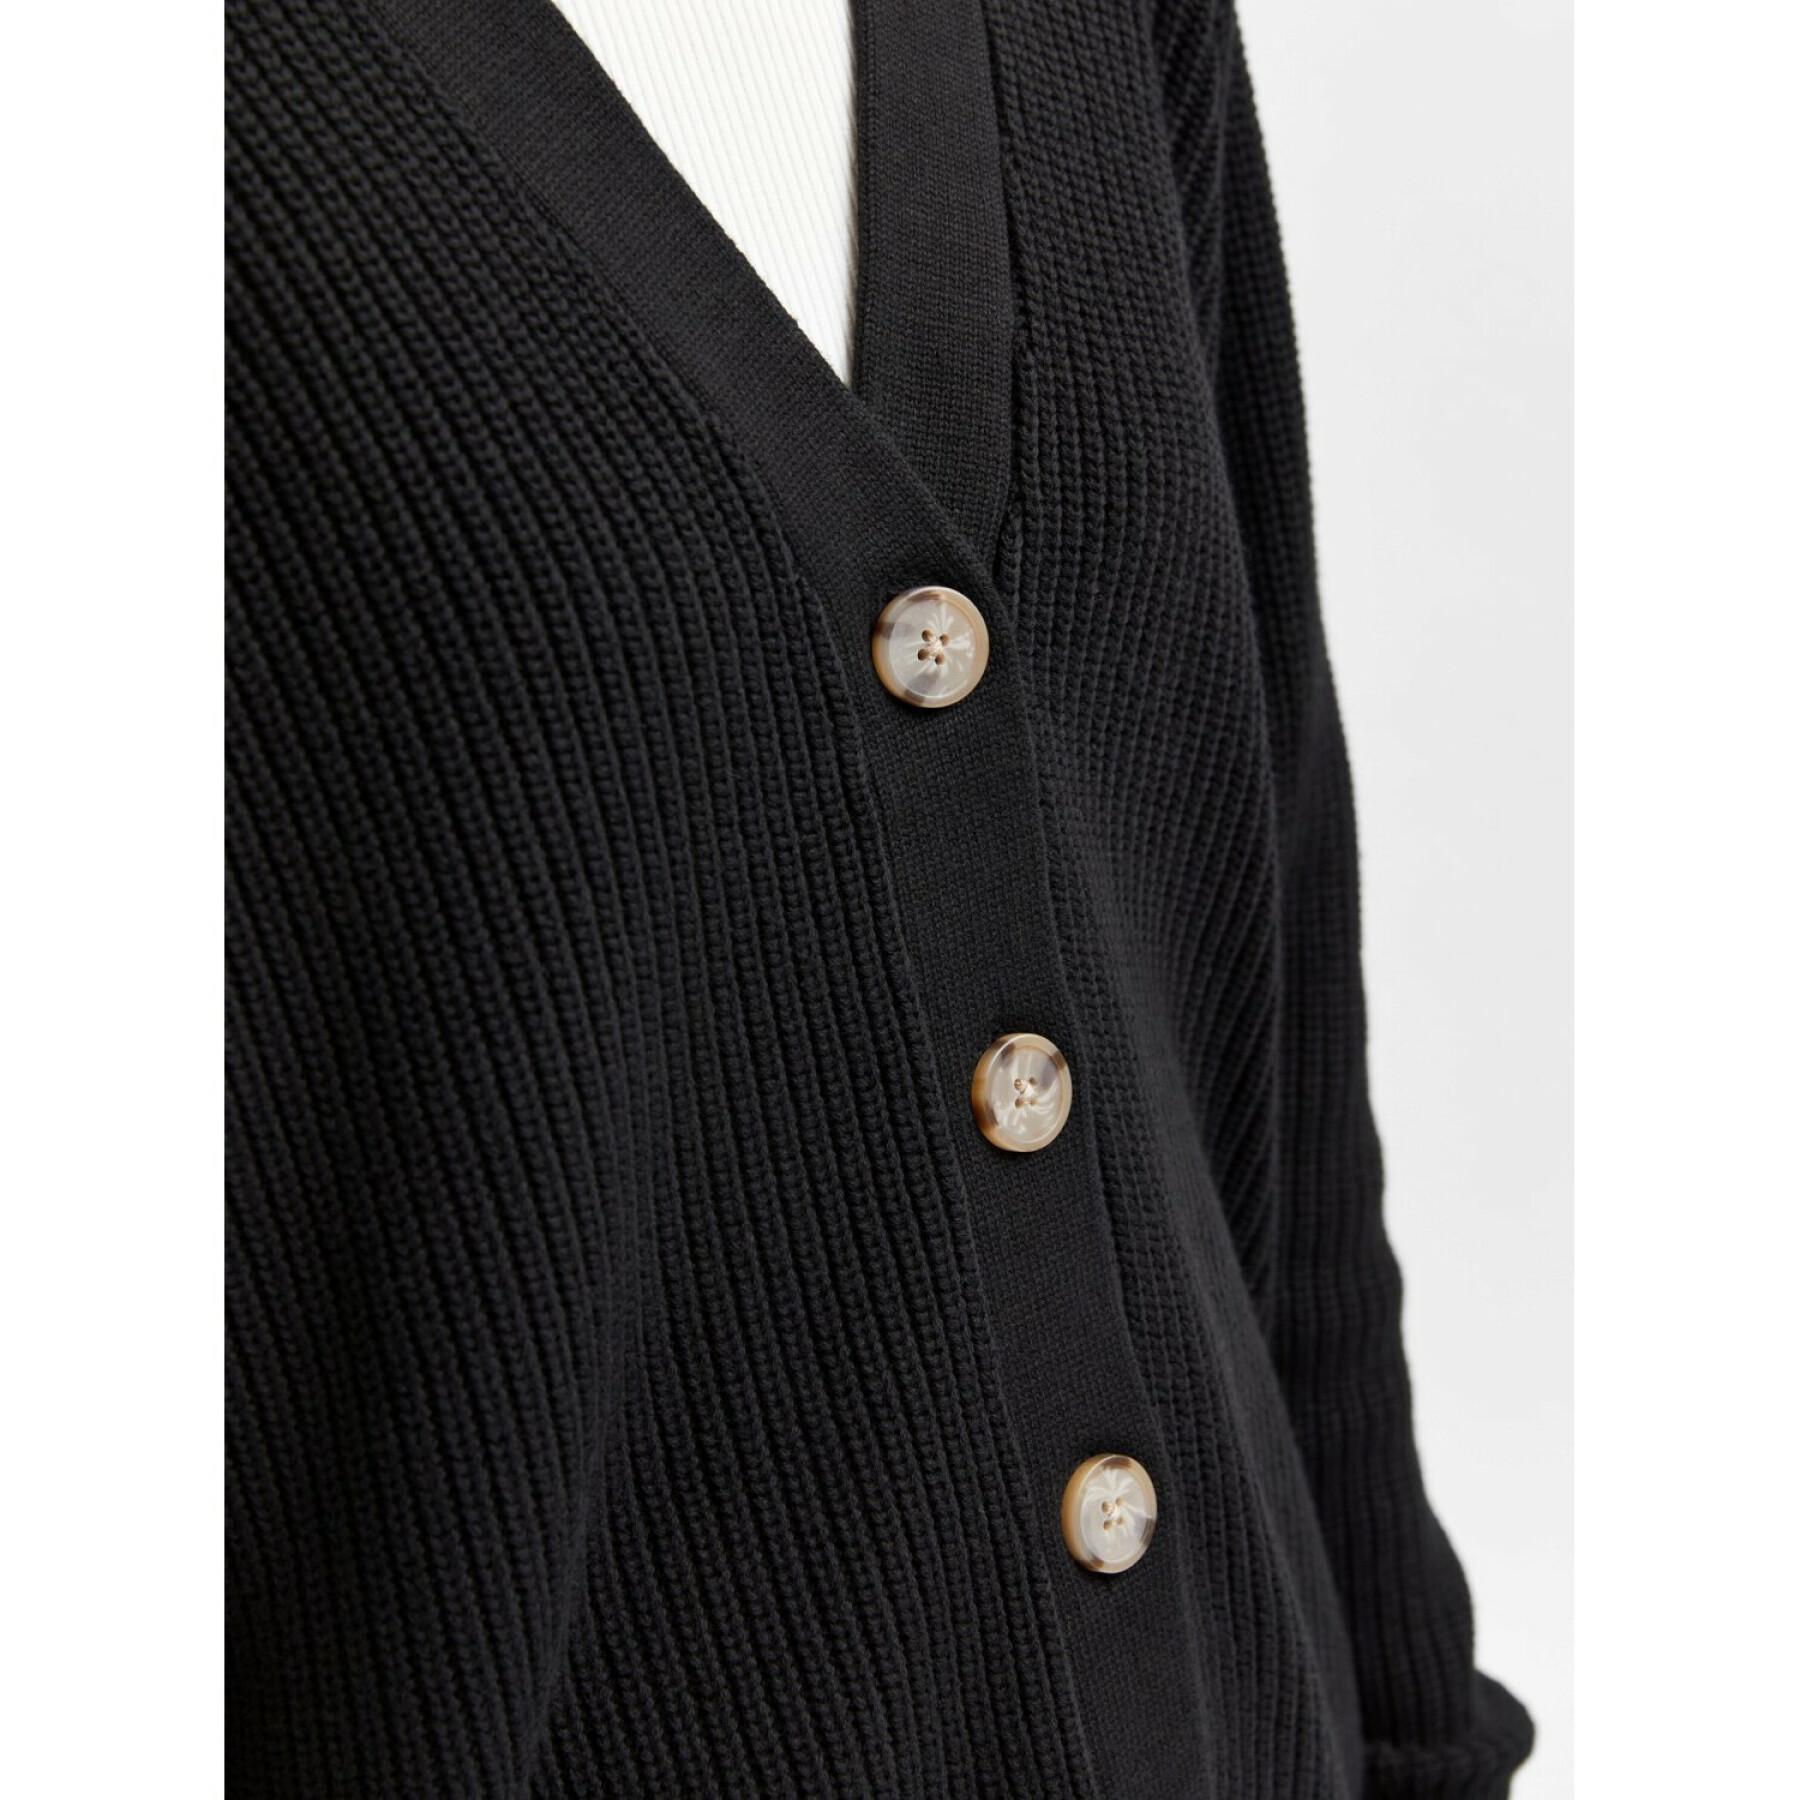 Cardigan femme Selected Emmy knit button